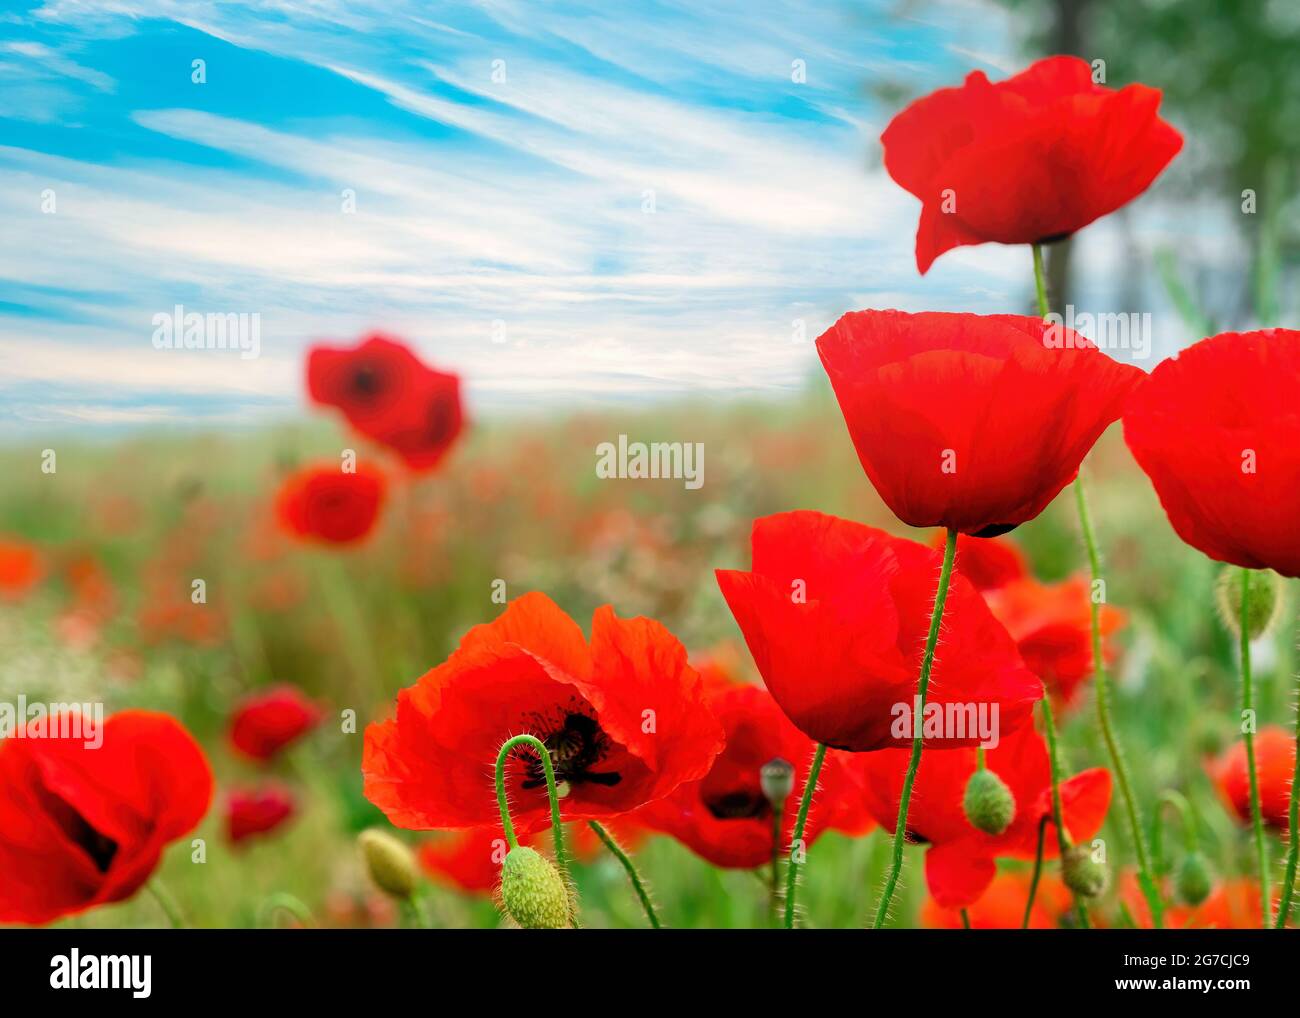 Red poppies field against a blue sky Stock Photo